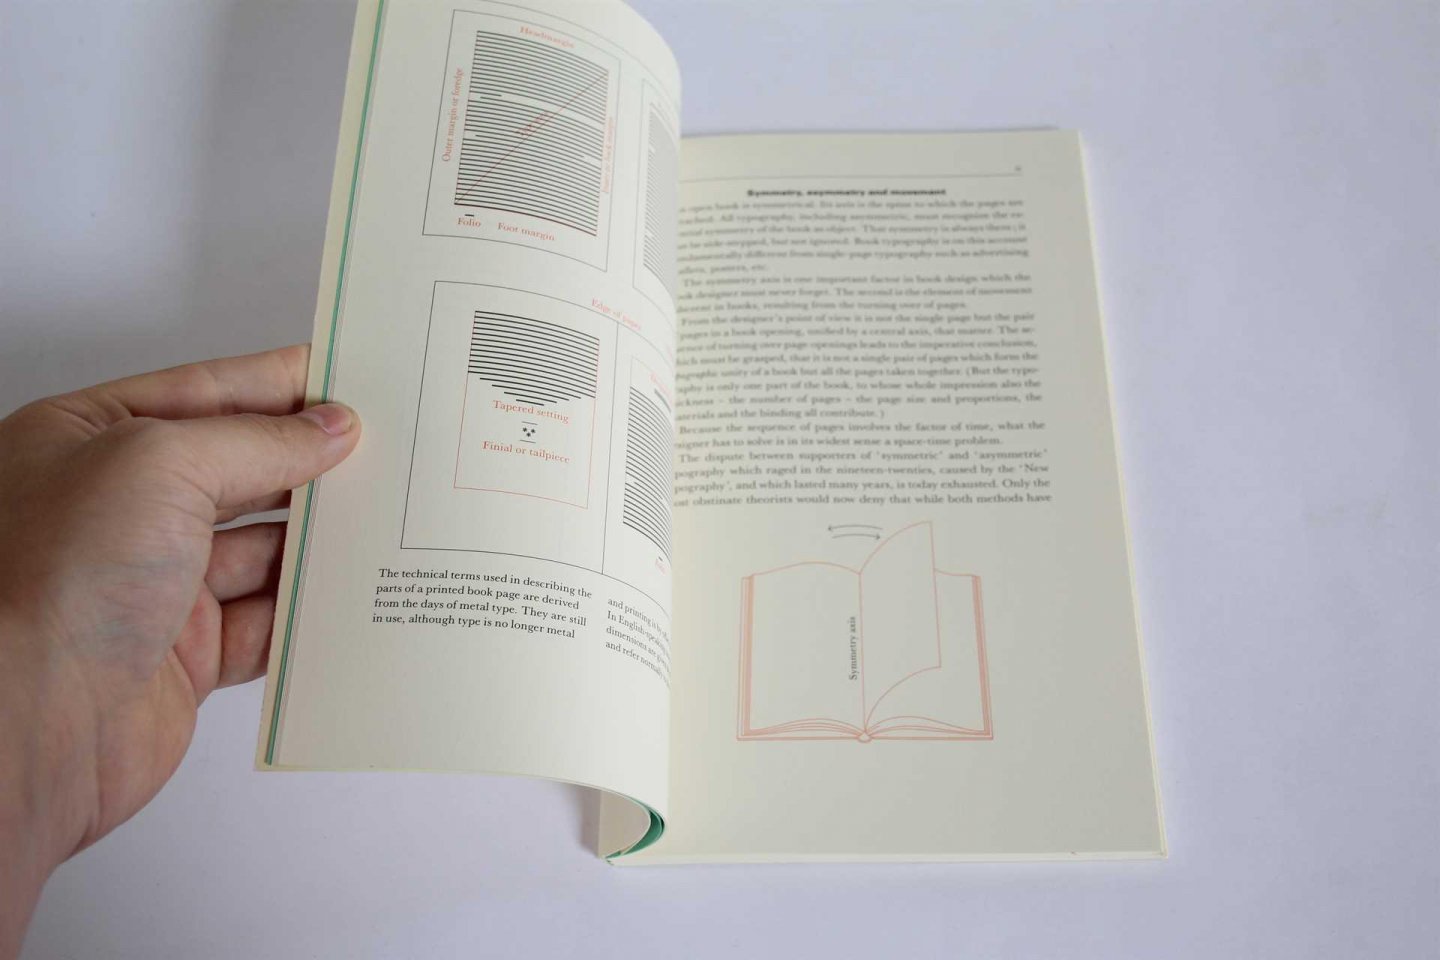 Jost Hochuli - Designing Books / An introduction to book design, and in particular, book typography